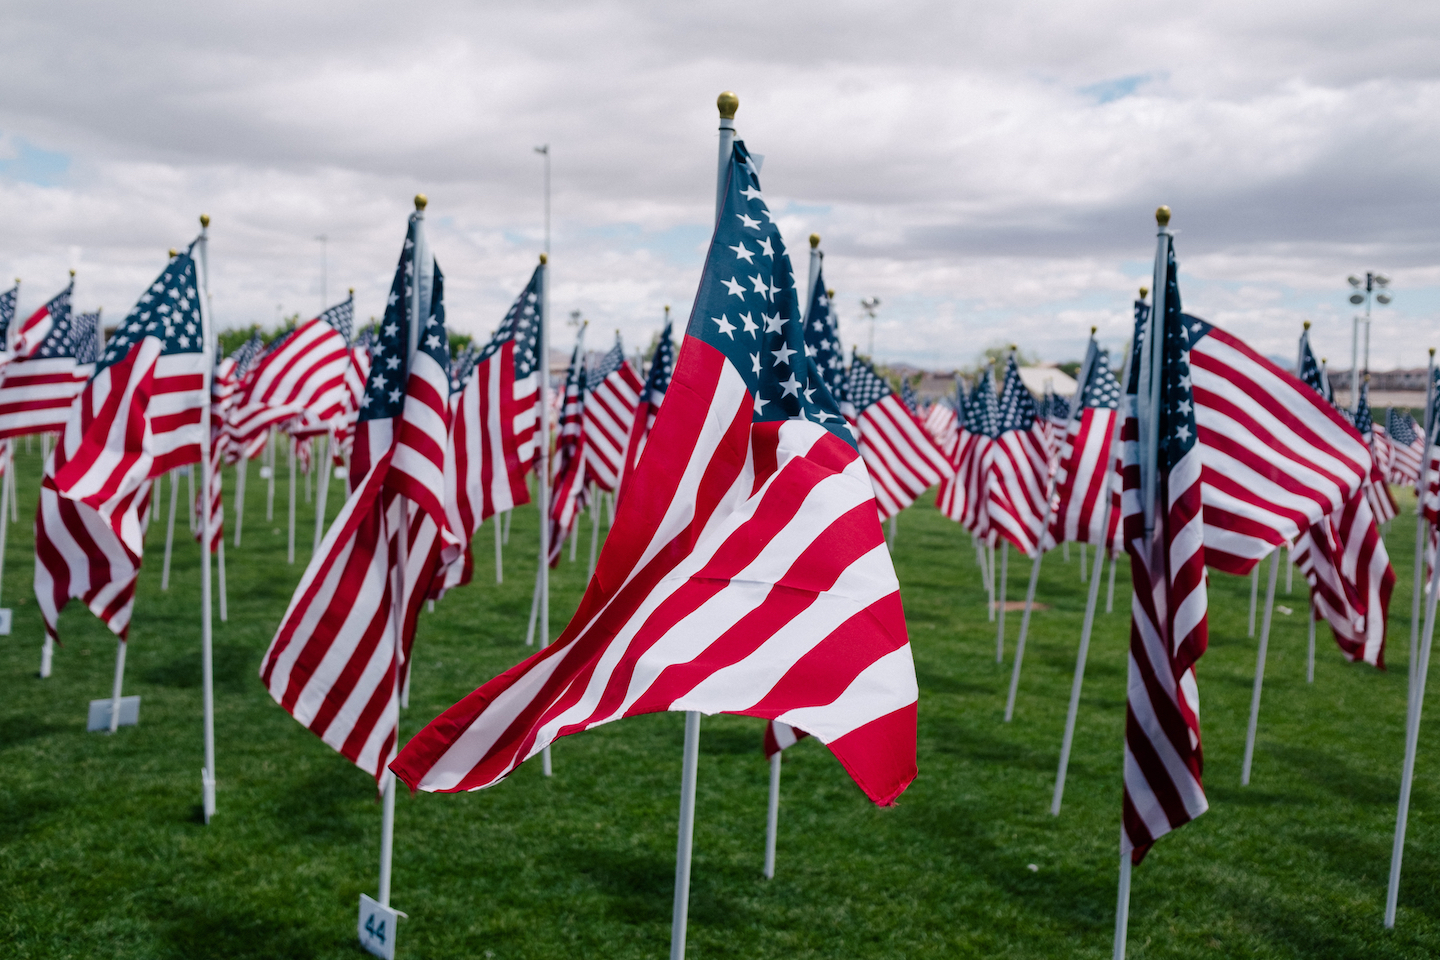 American flags staked into the grass